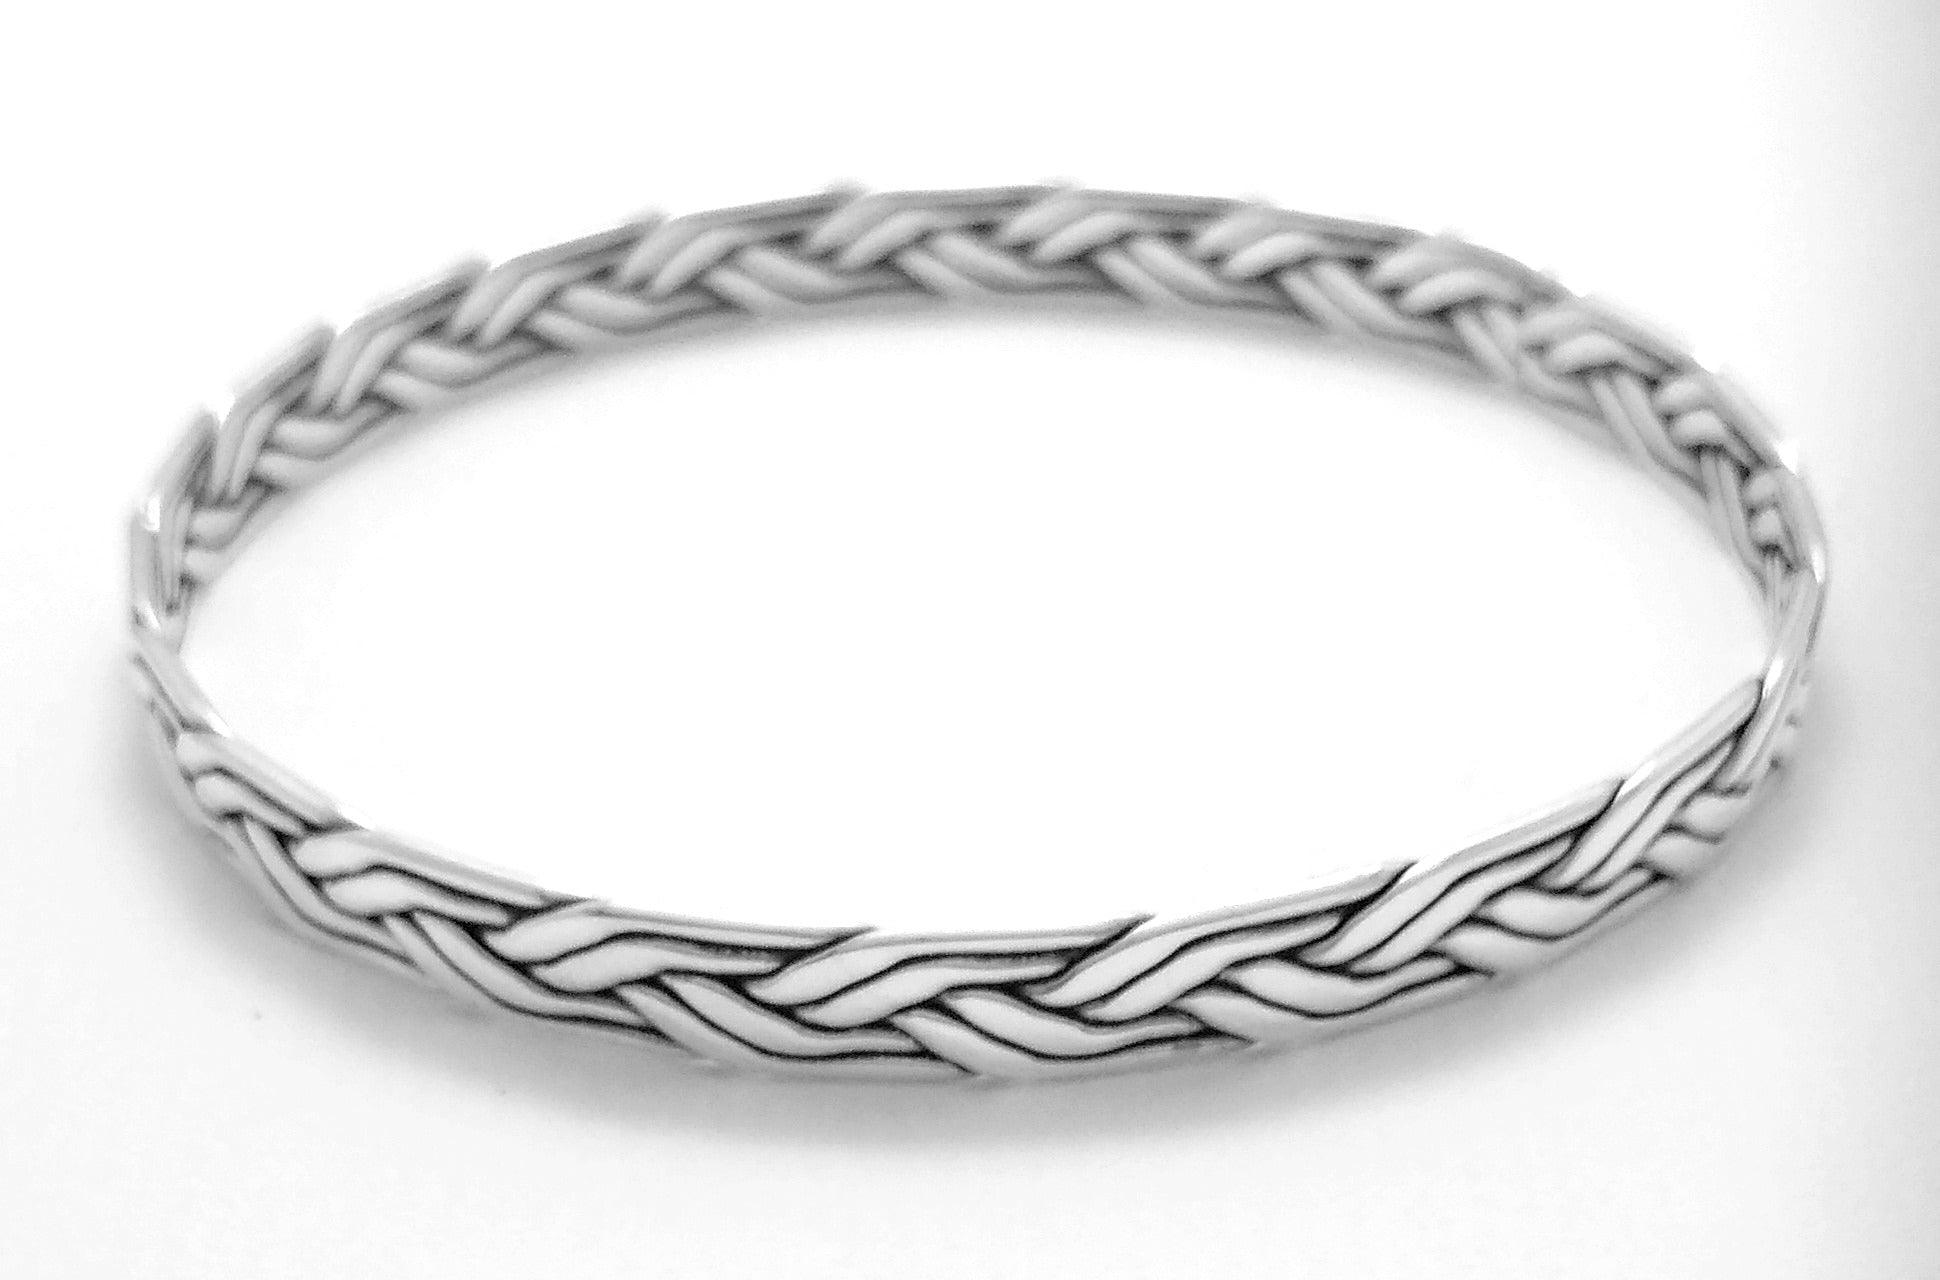 925 Sterling Silver 4 strand braided/woven bangle